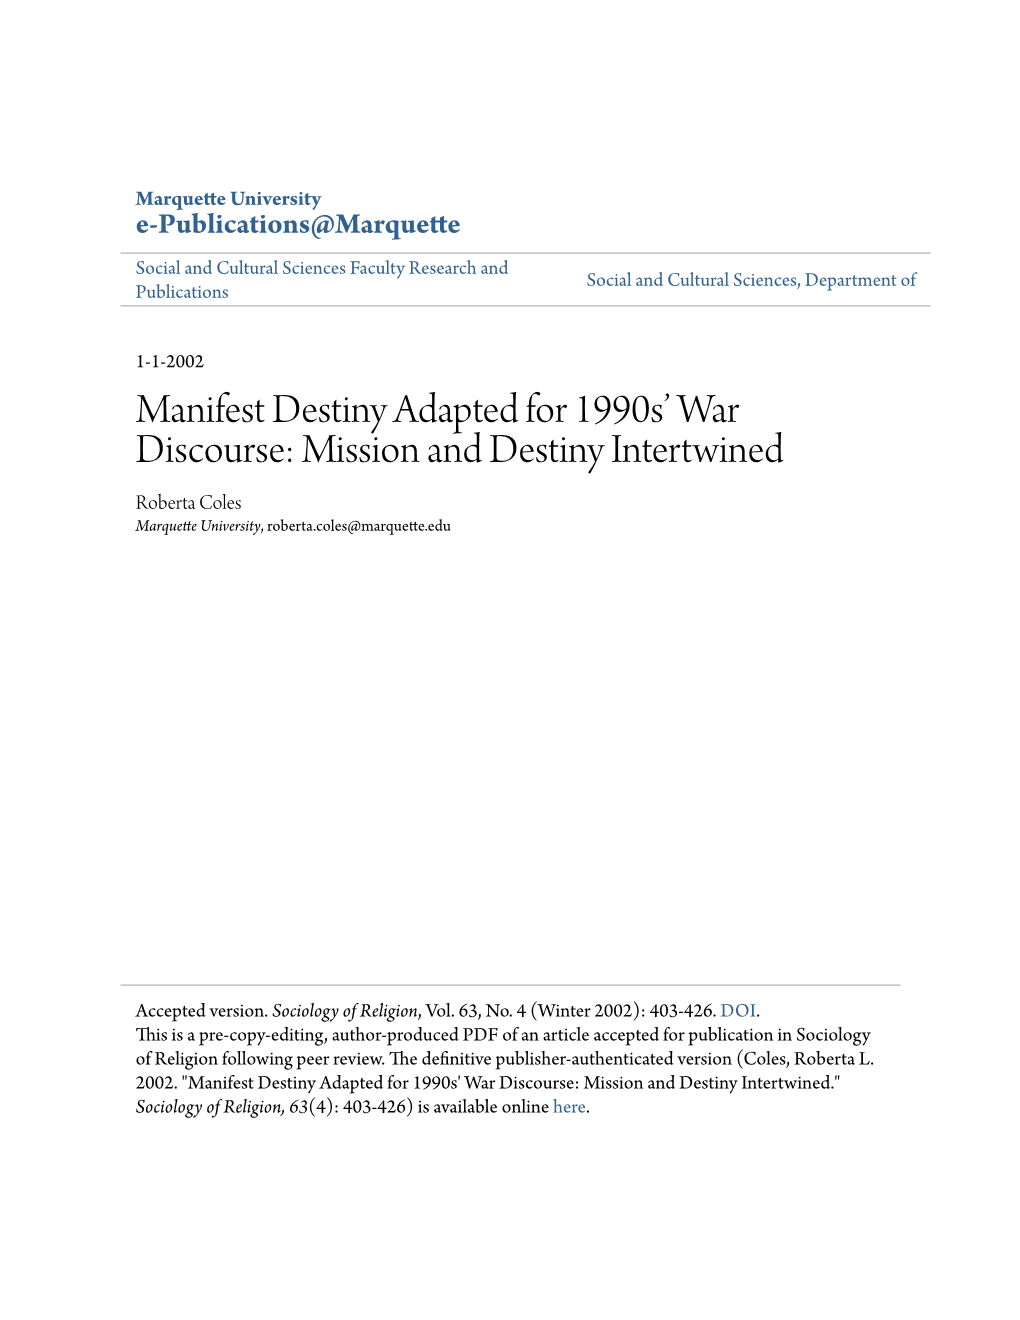 Manifest Destiny Adapted for 1990S' War Discourse: Mission and Destiny Intertwined." Sociology of Religion, 63(4): 403-426) Is Available Online Here